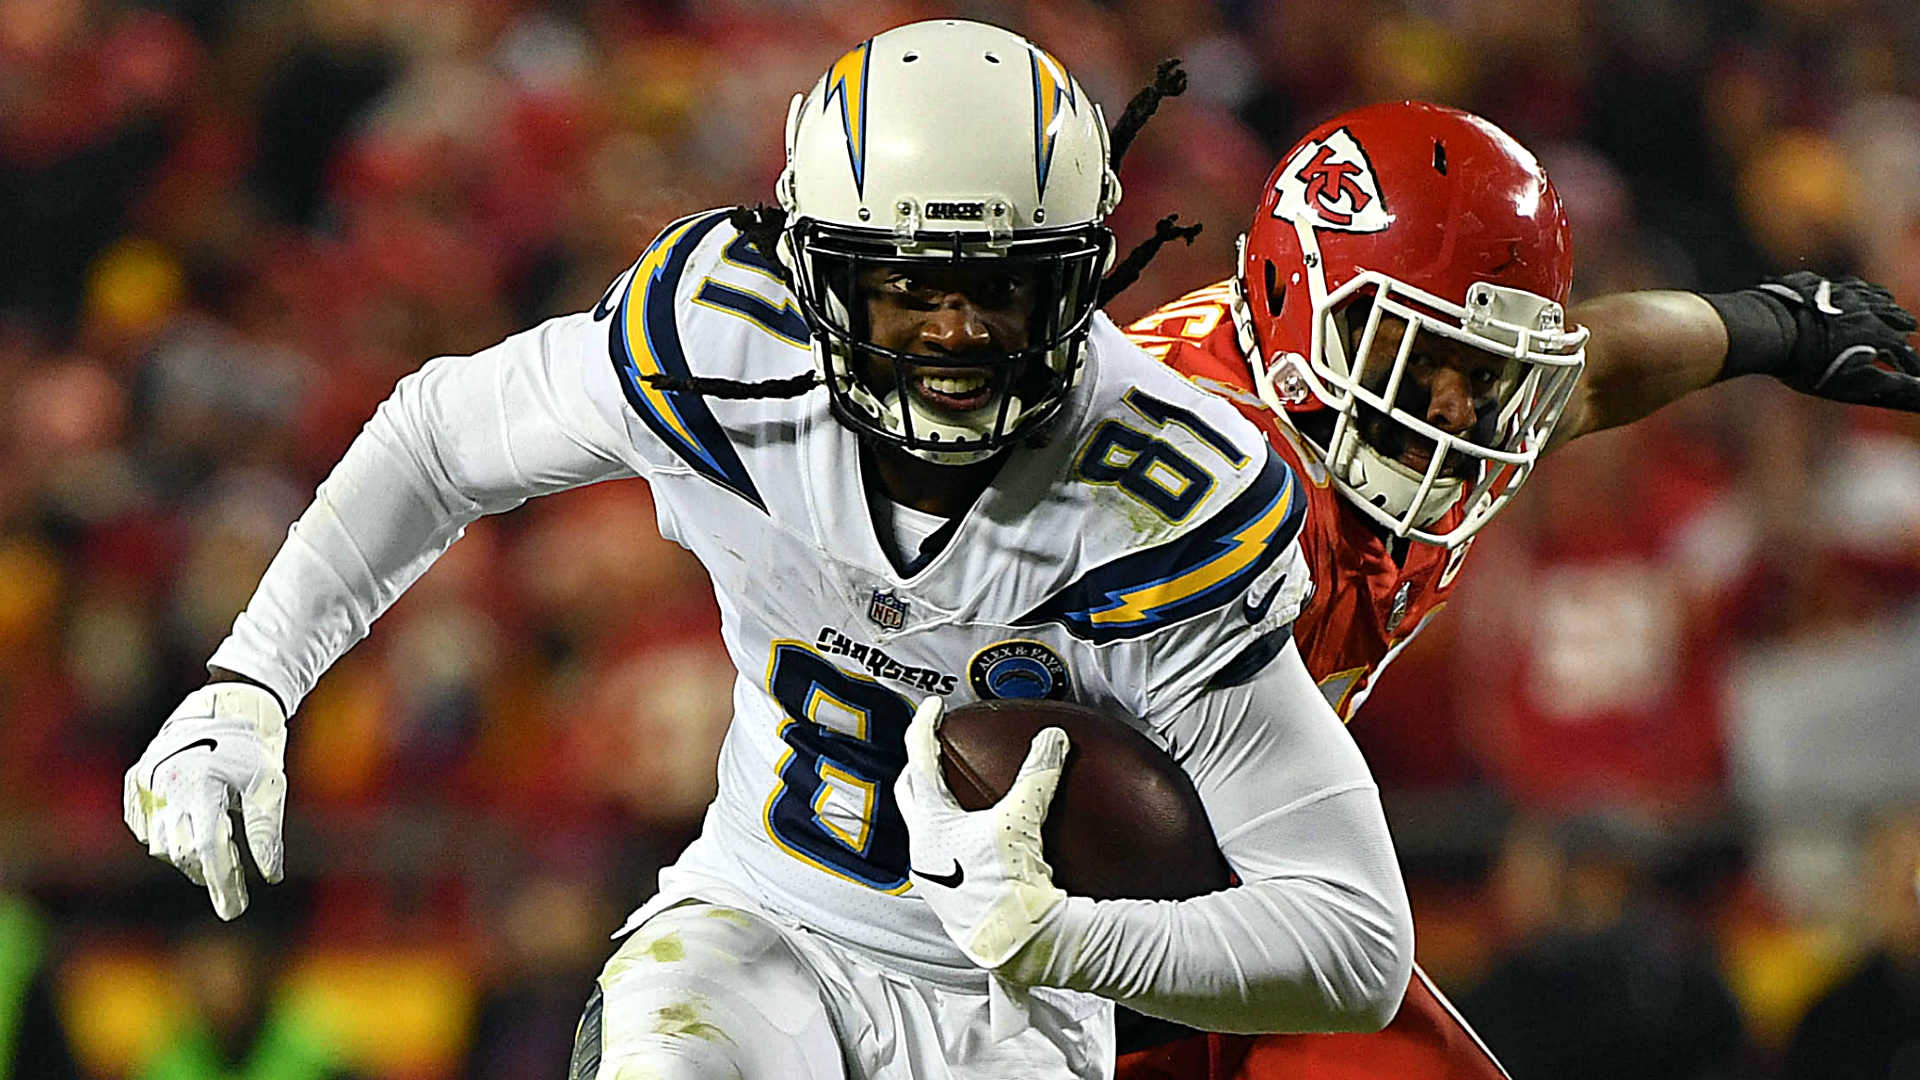 NFL playoff picture: Chargers clinch AFC berth, keep Chiefs from West